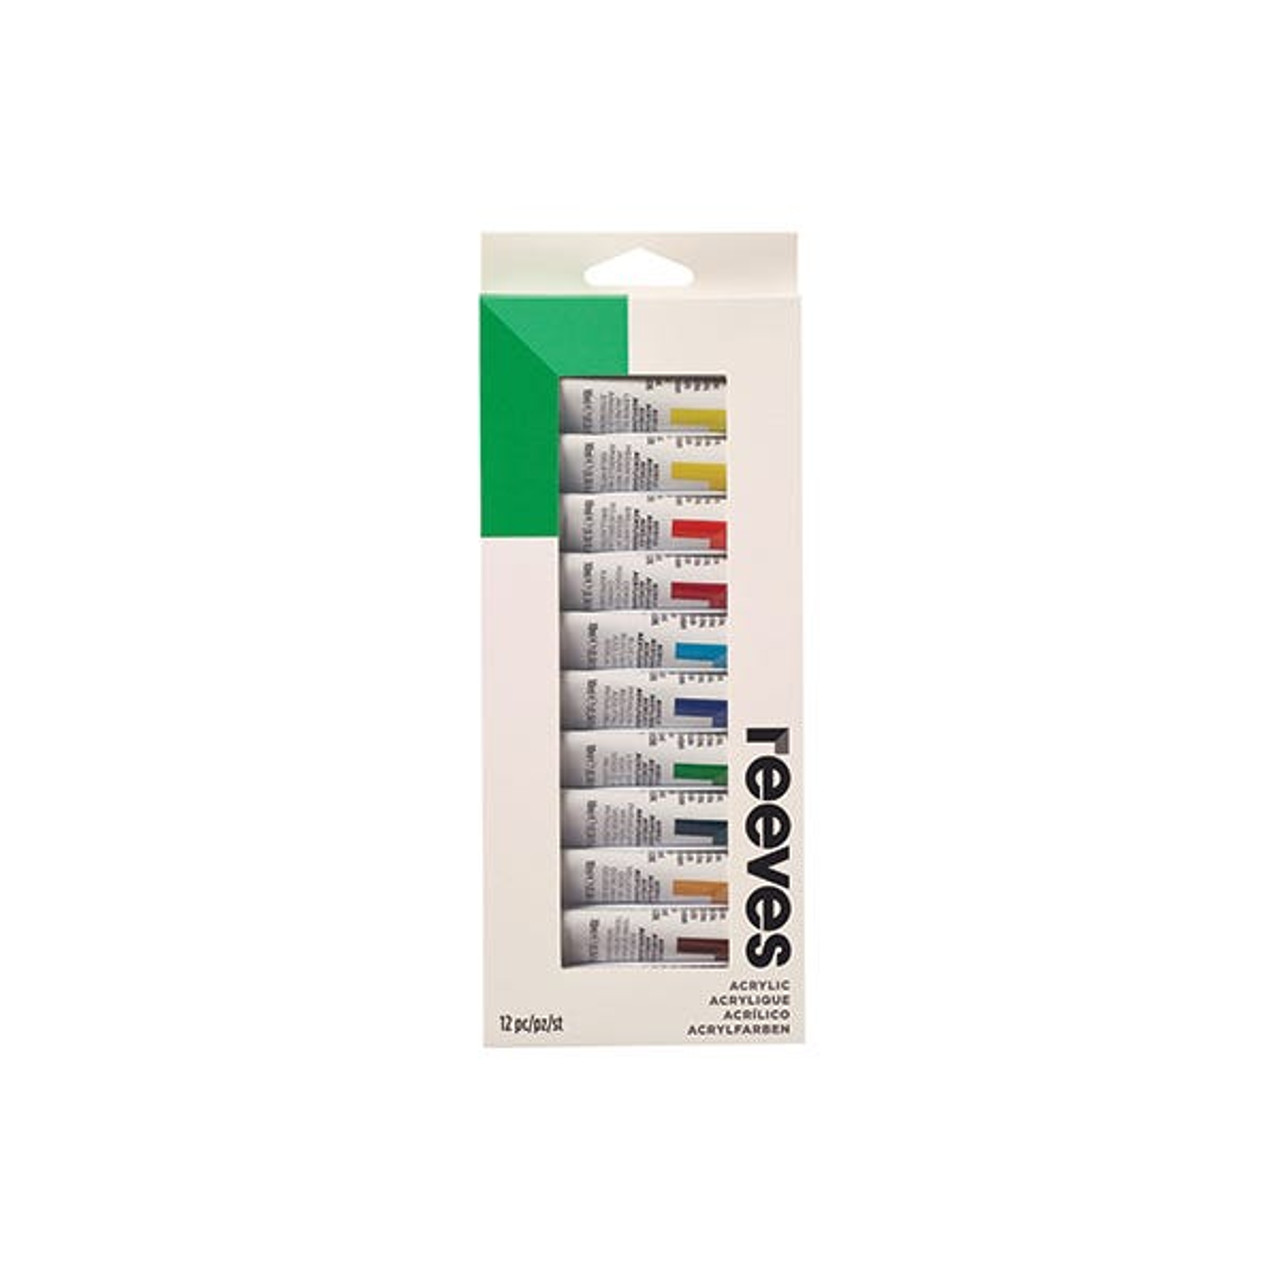 Reeves Acrylic Paint Set of 12